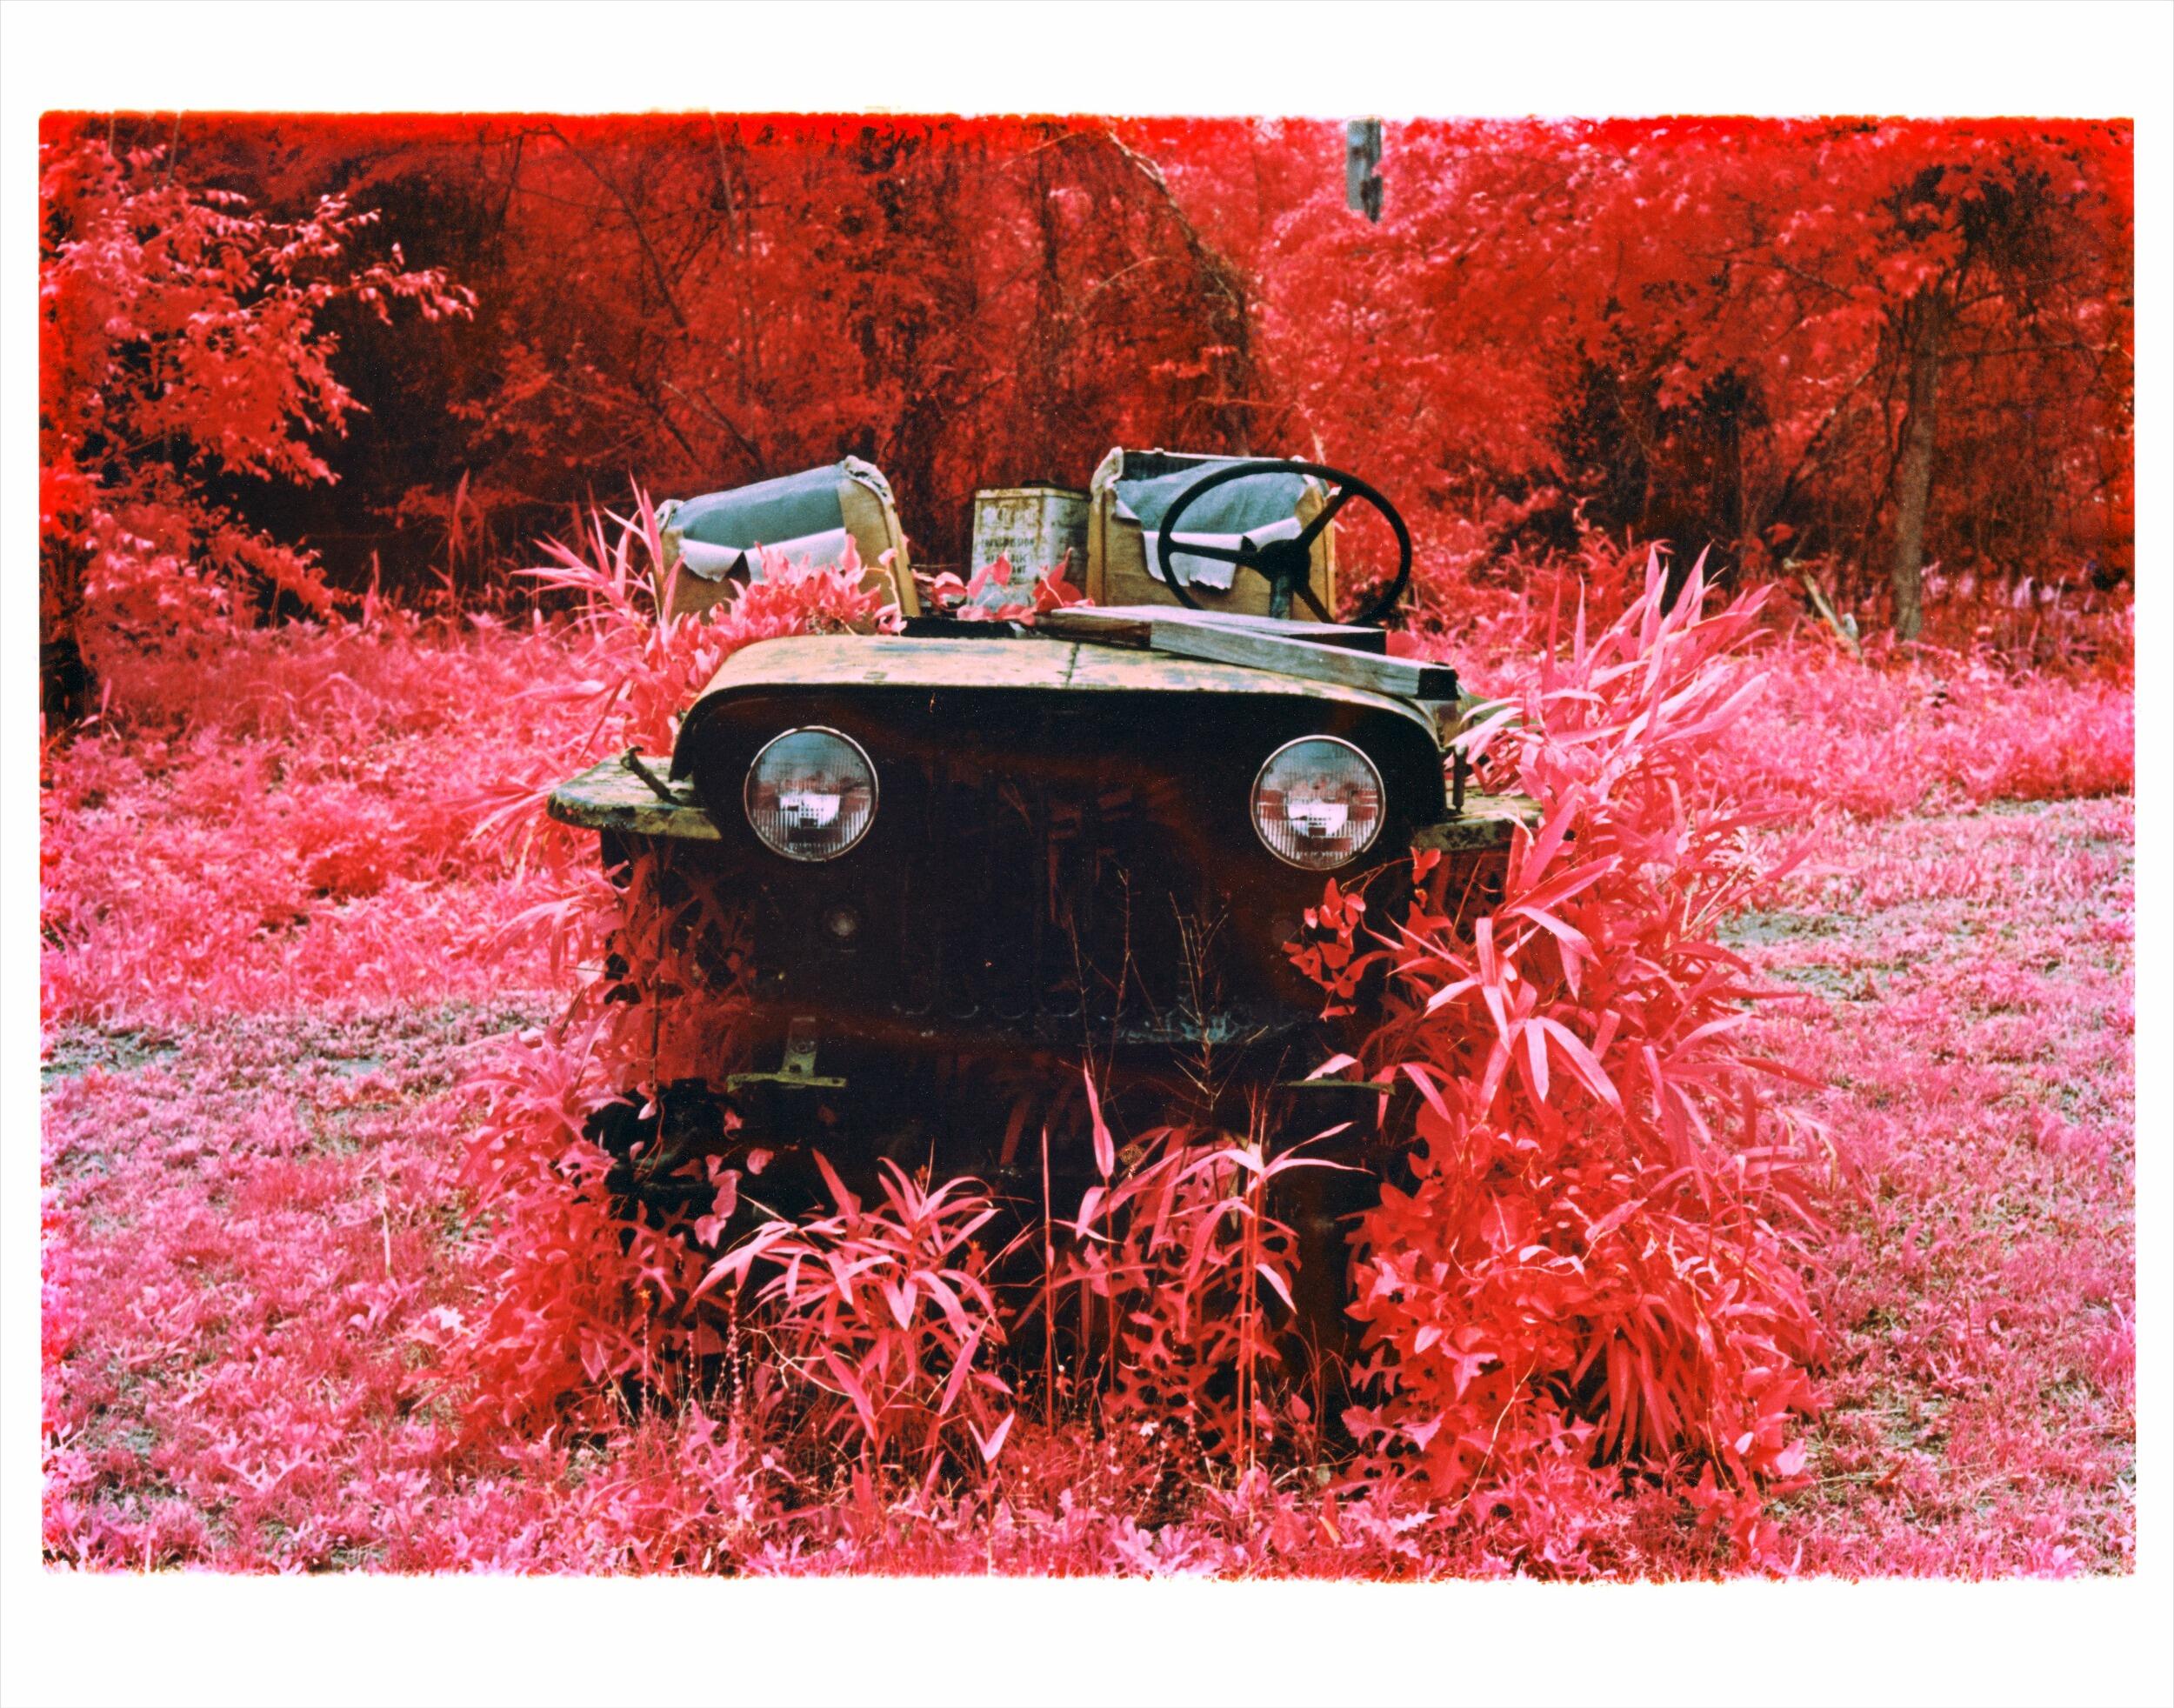 A photo of a rusted jeep in the middle of a red field with plants growing over it. 